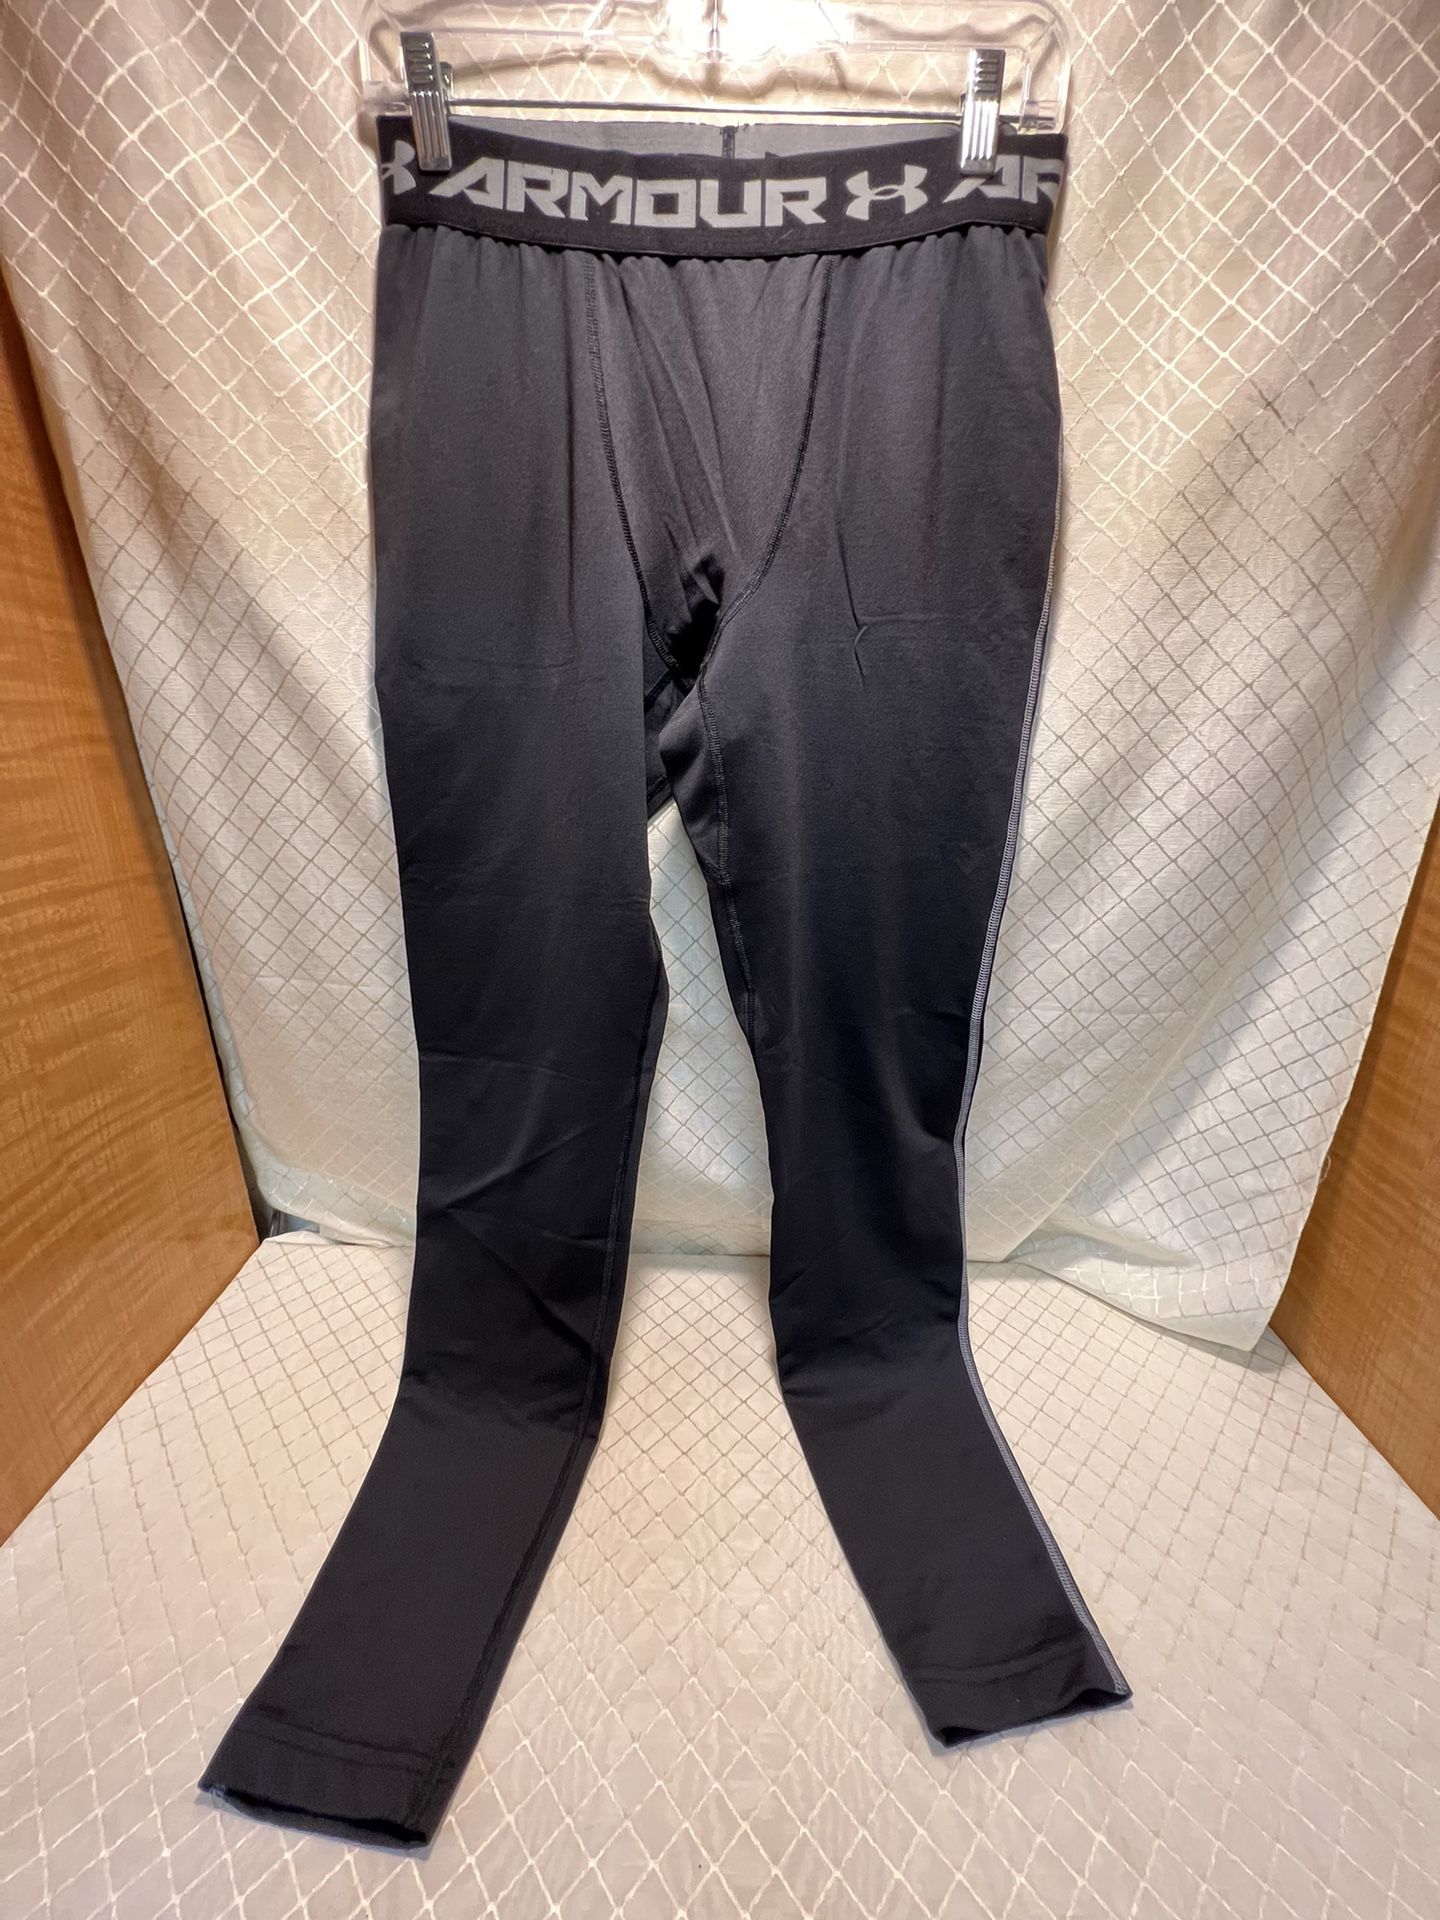 Under Armour Boys Coldgear Active Leggings Youth XL for Sale in Davenport, FL OfferUp